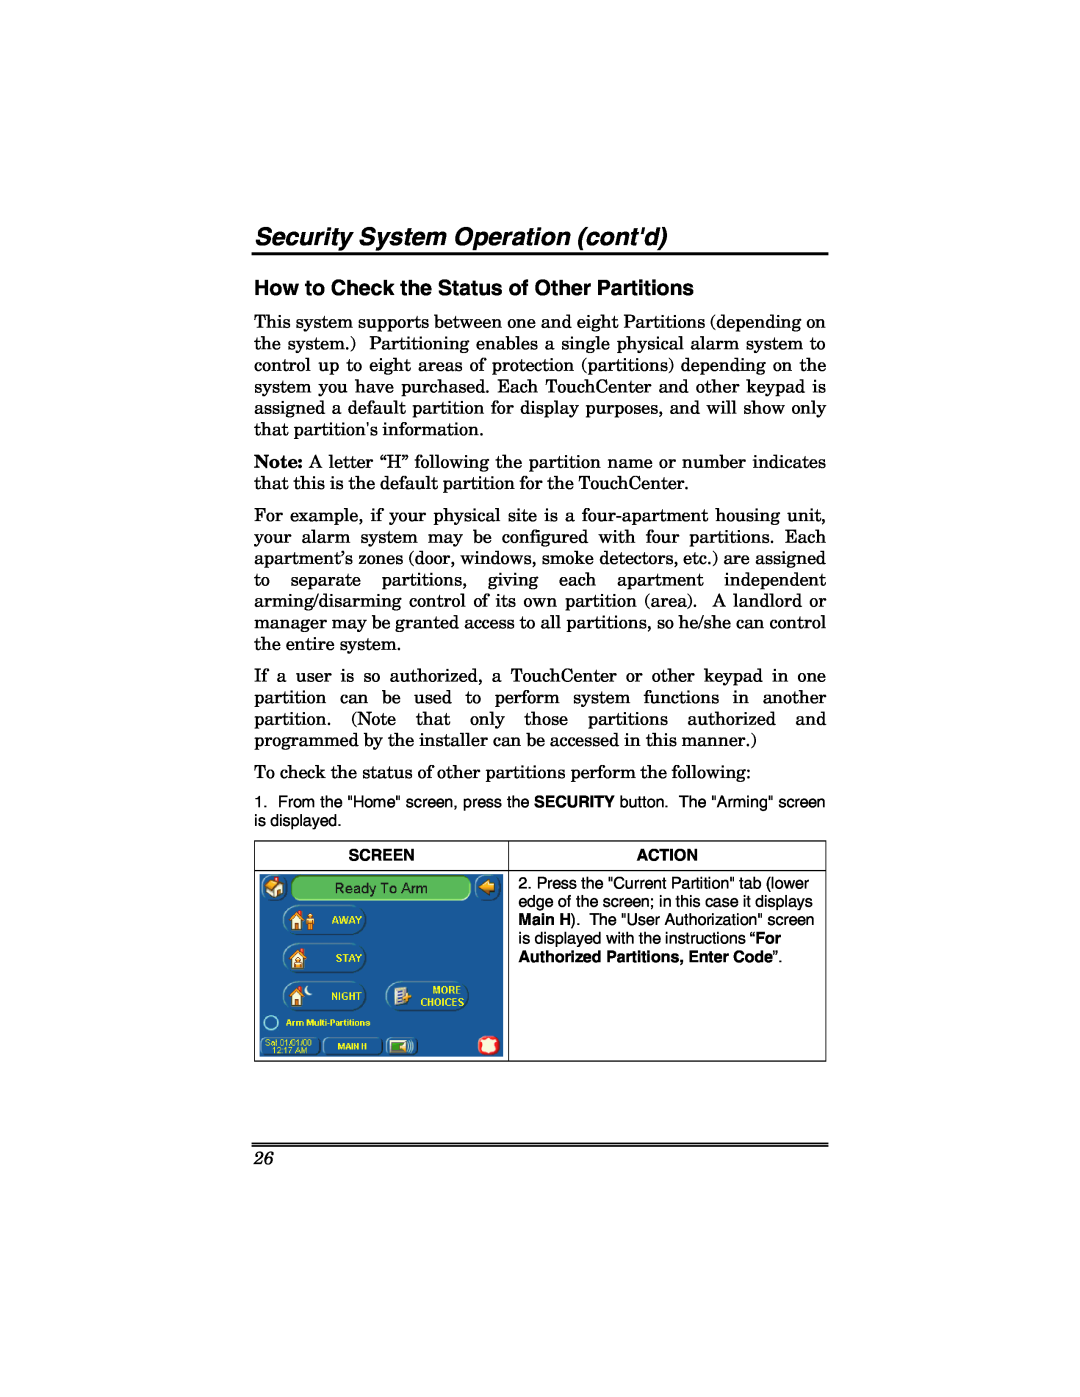 Honeywell 6271 manual How to Check the Status of Other Partitions, Security System Operation contd 